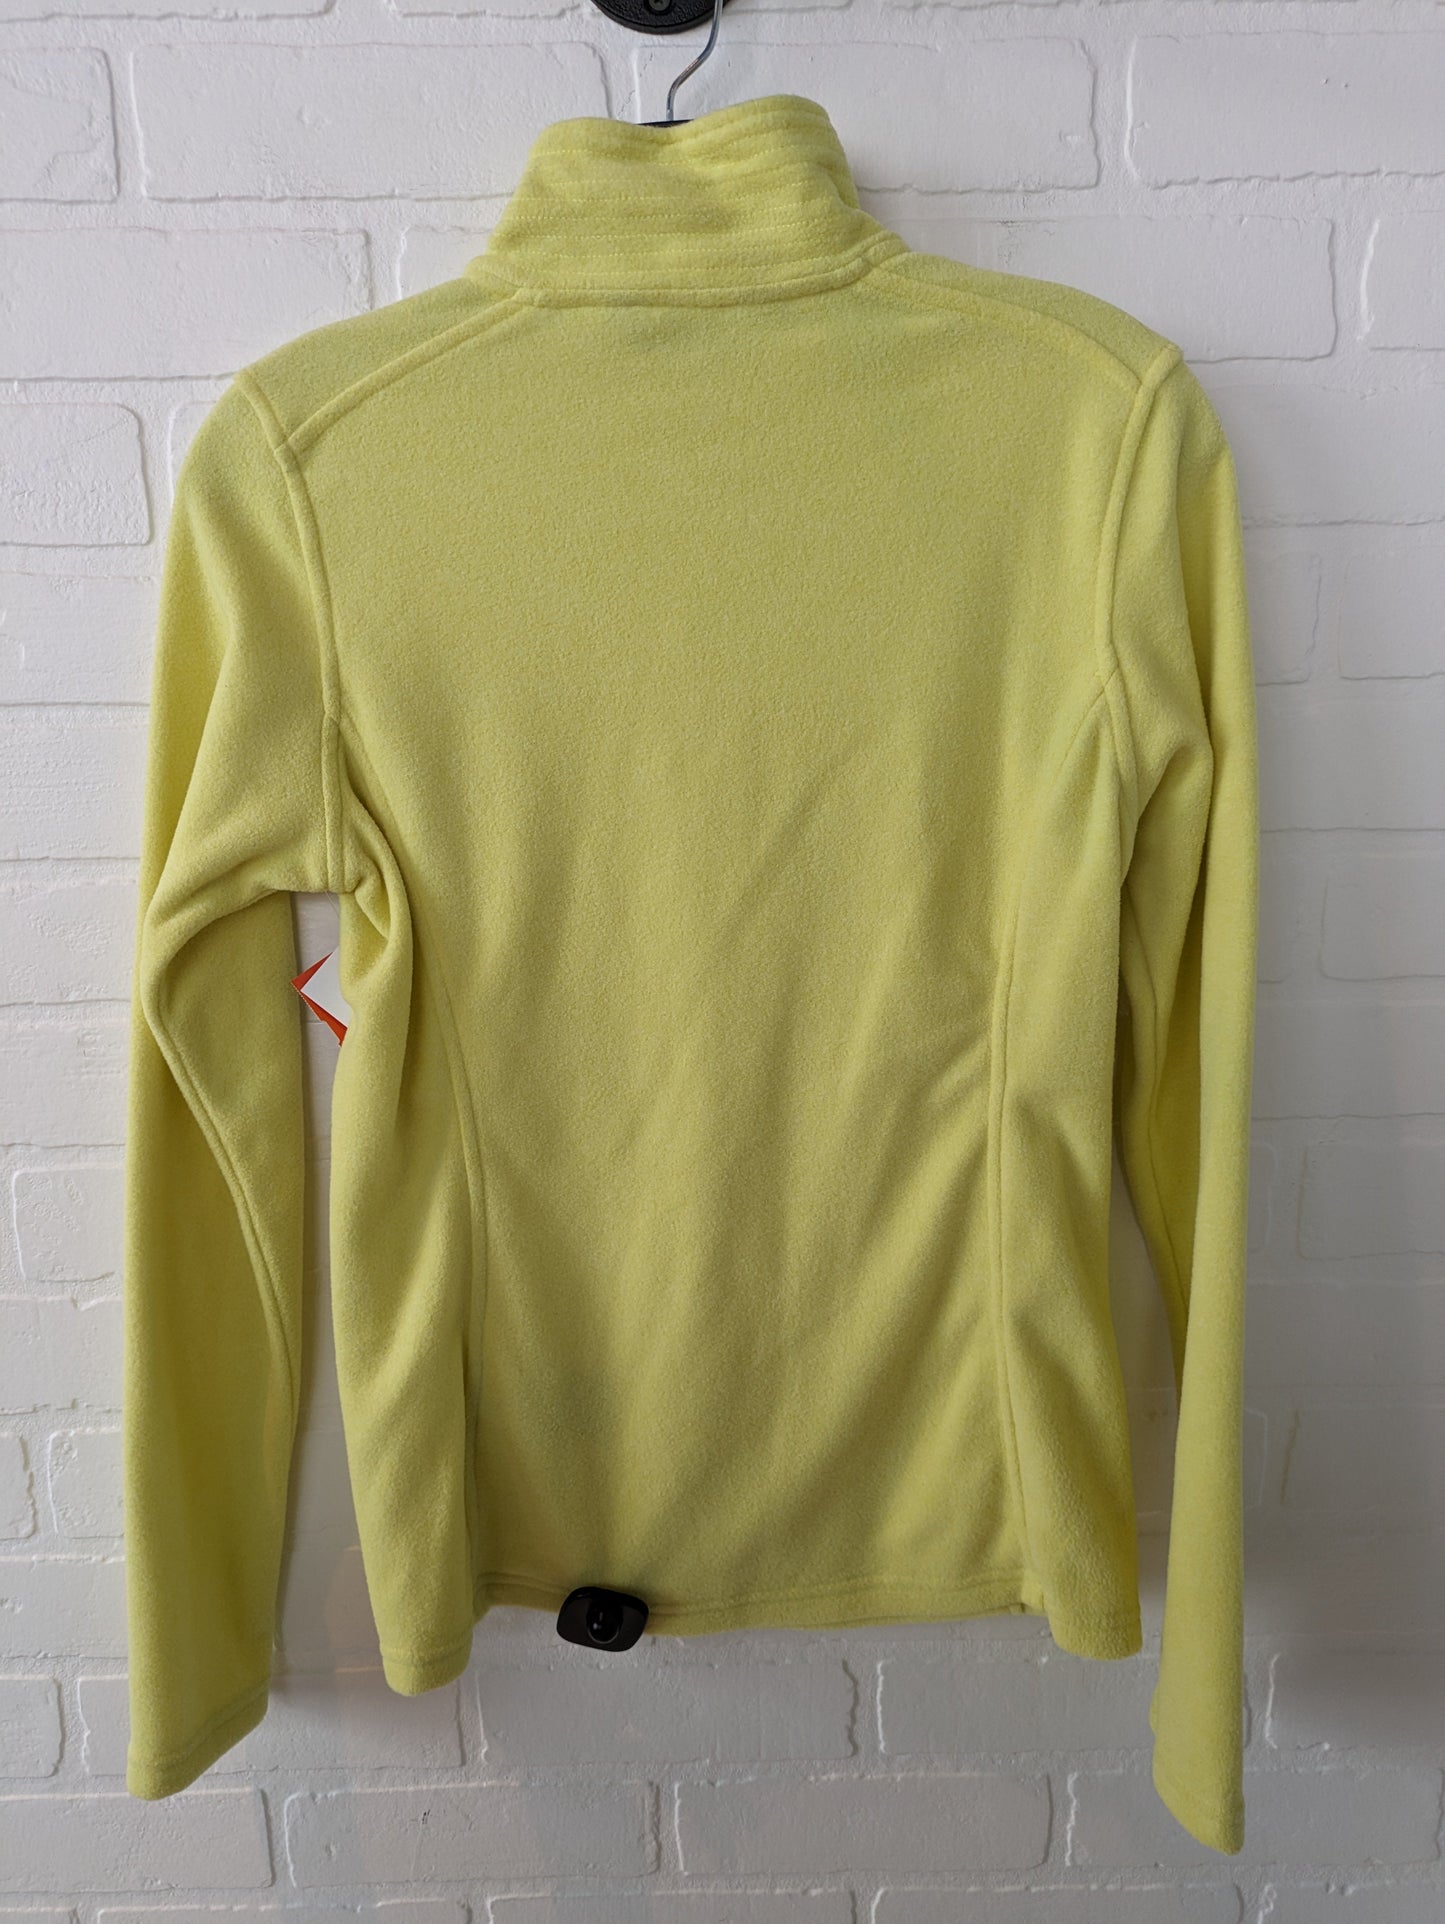 Top Long Sleeve Fleece Pullover By North Face  Size: Xs